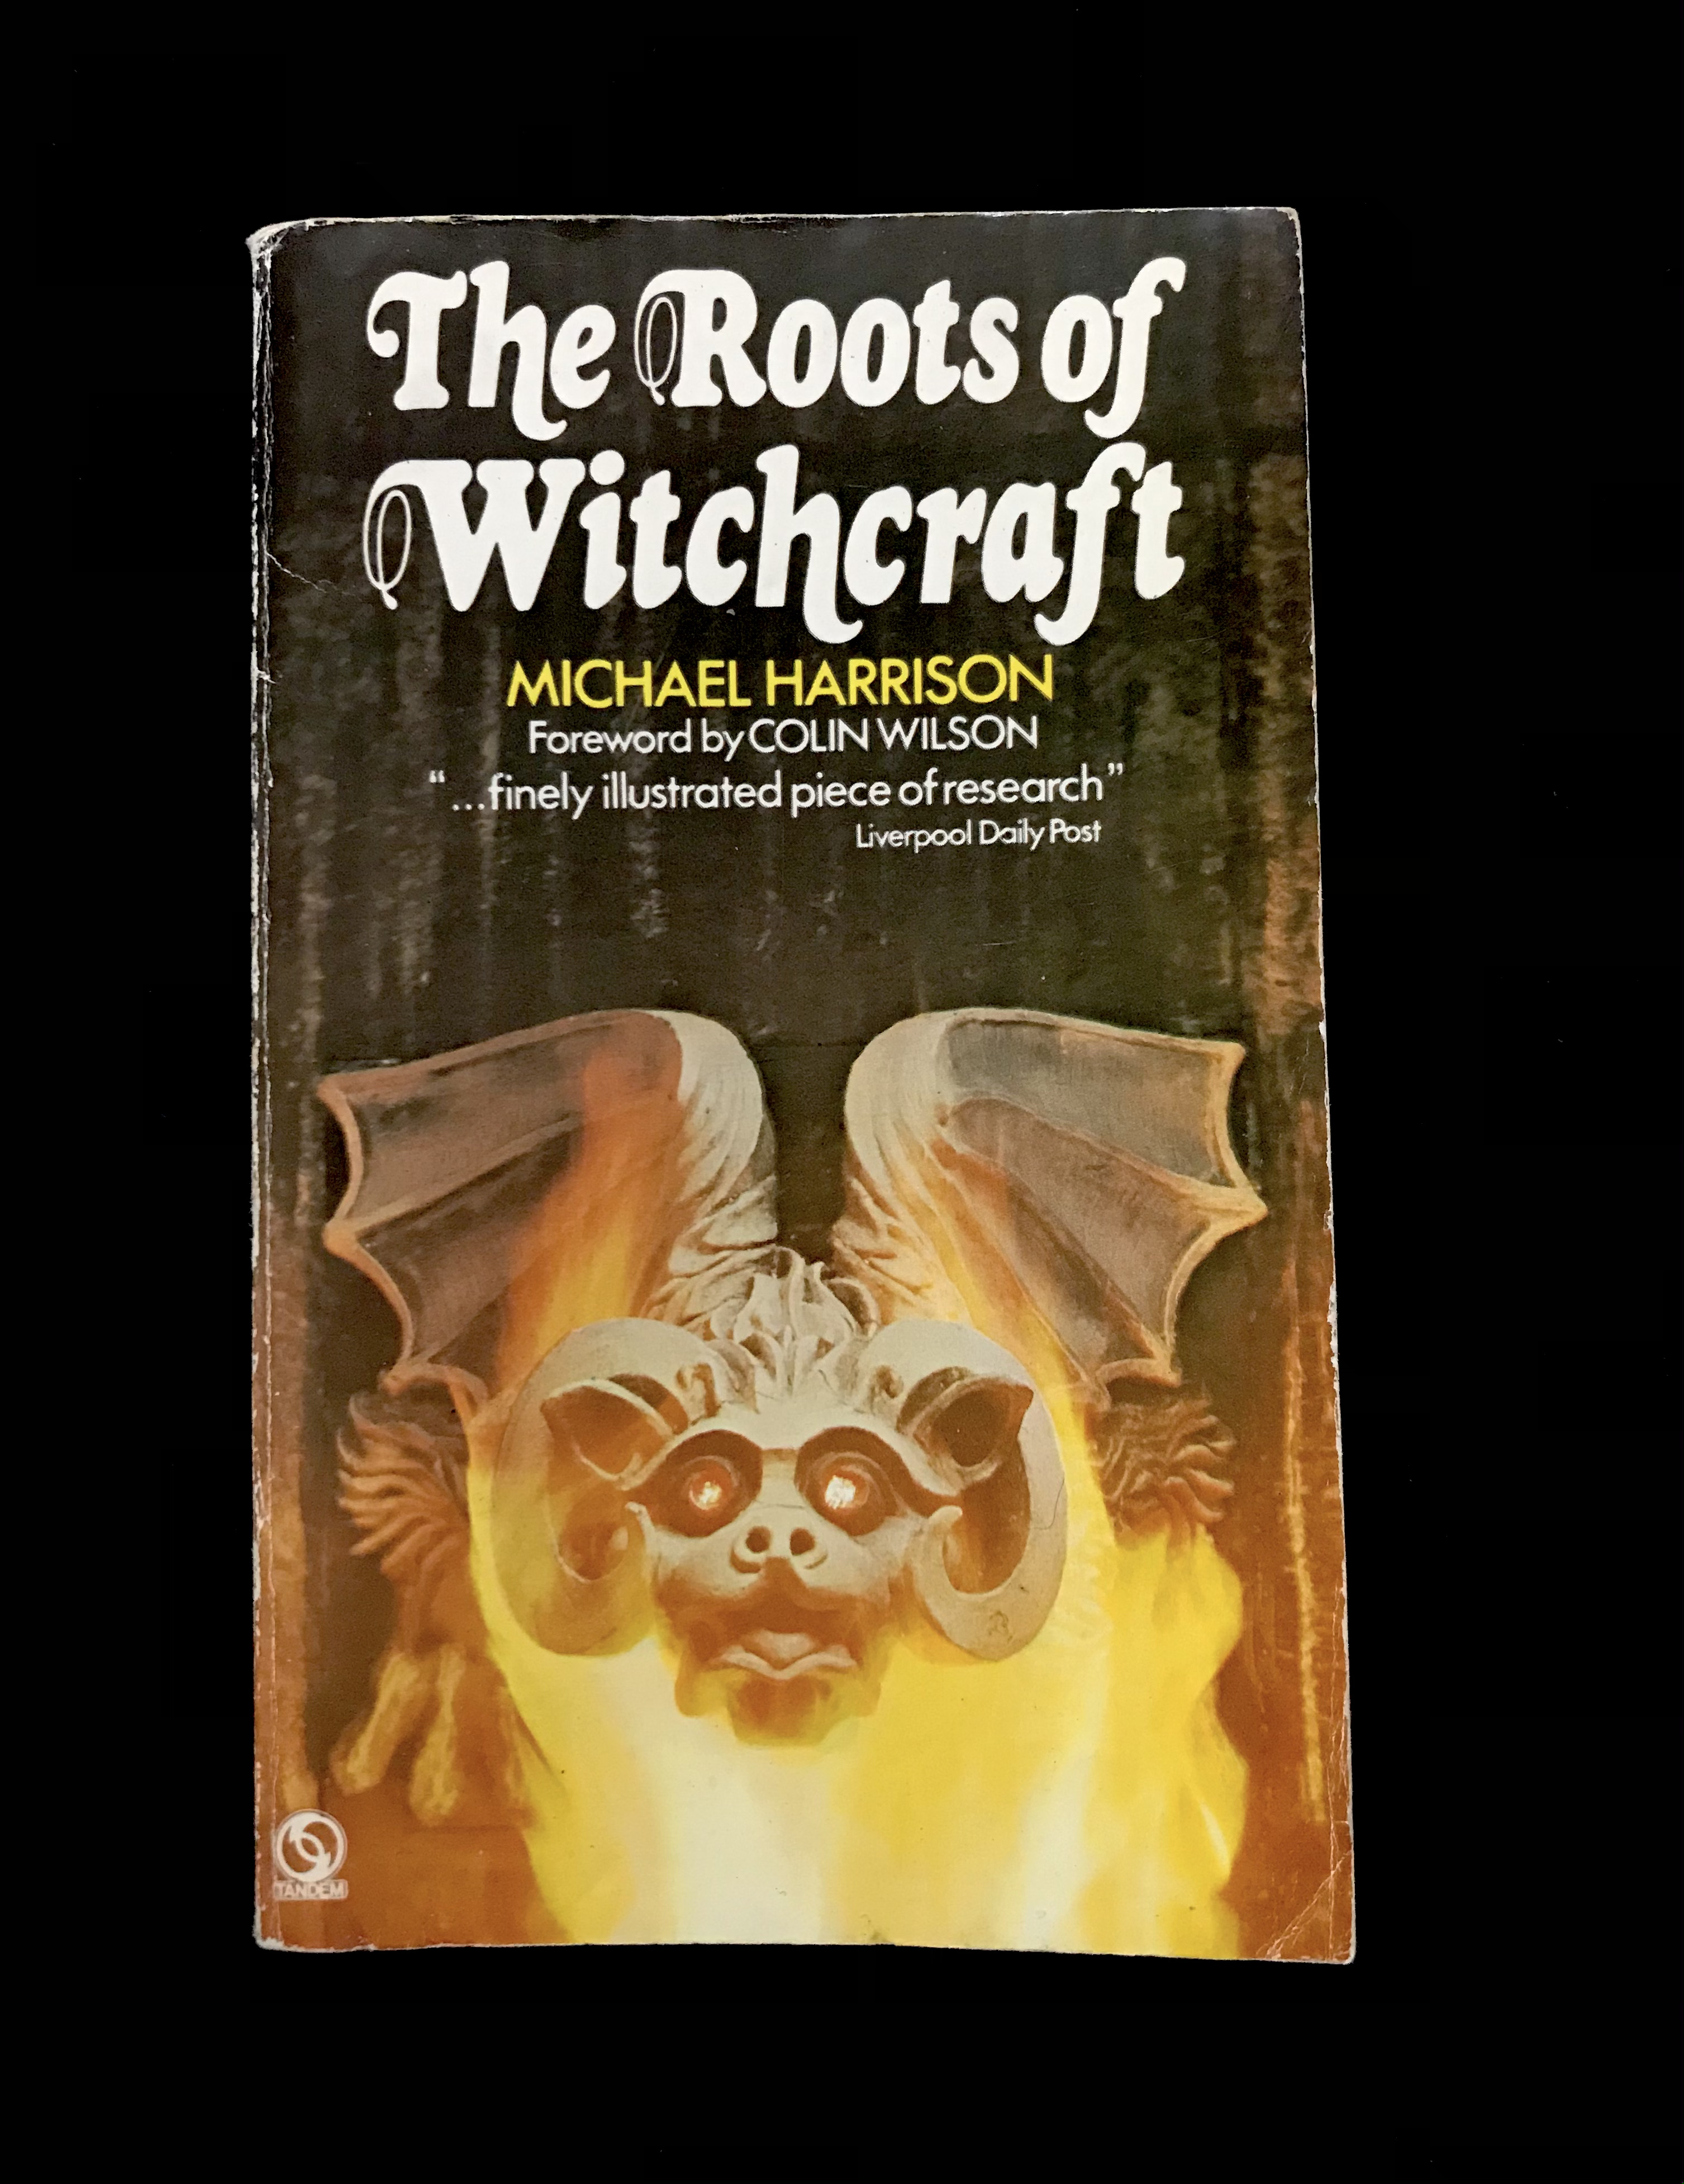 The Roots of Witchcraft by Michael Harrison